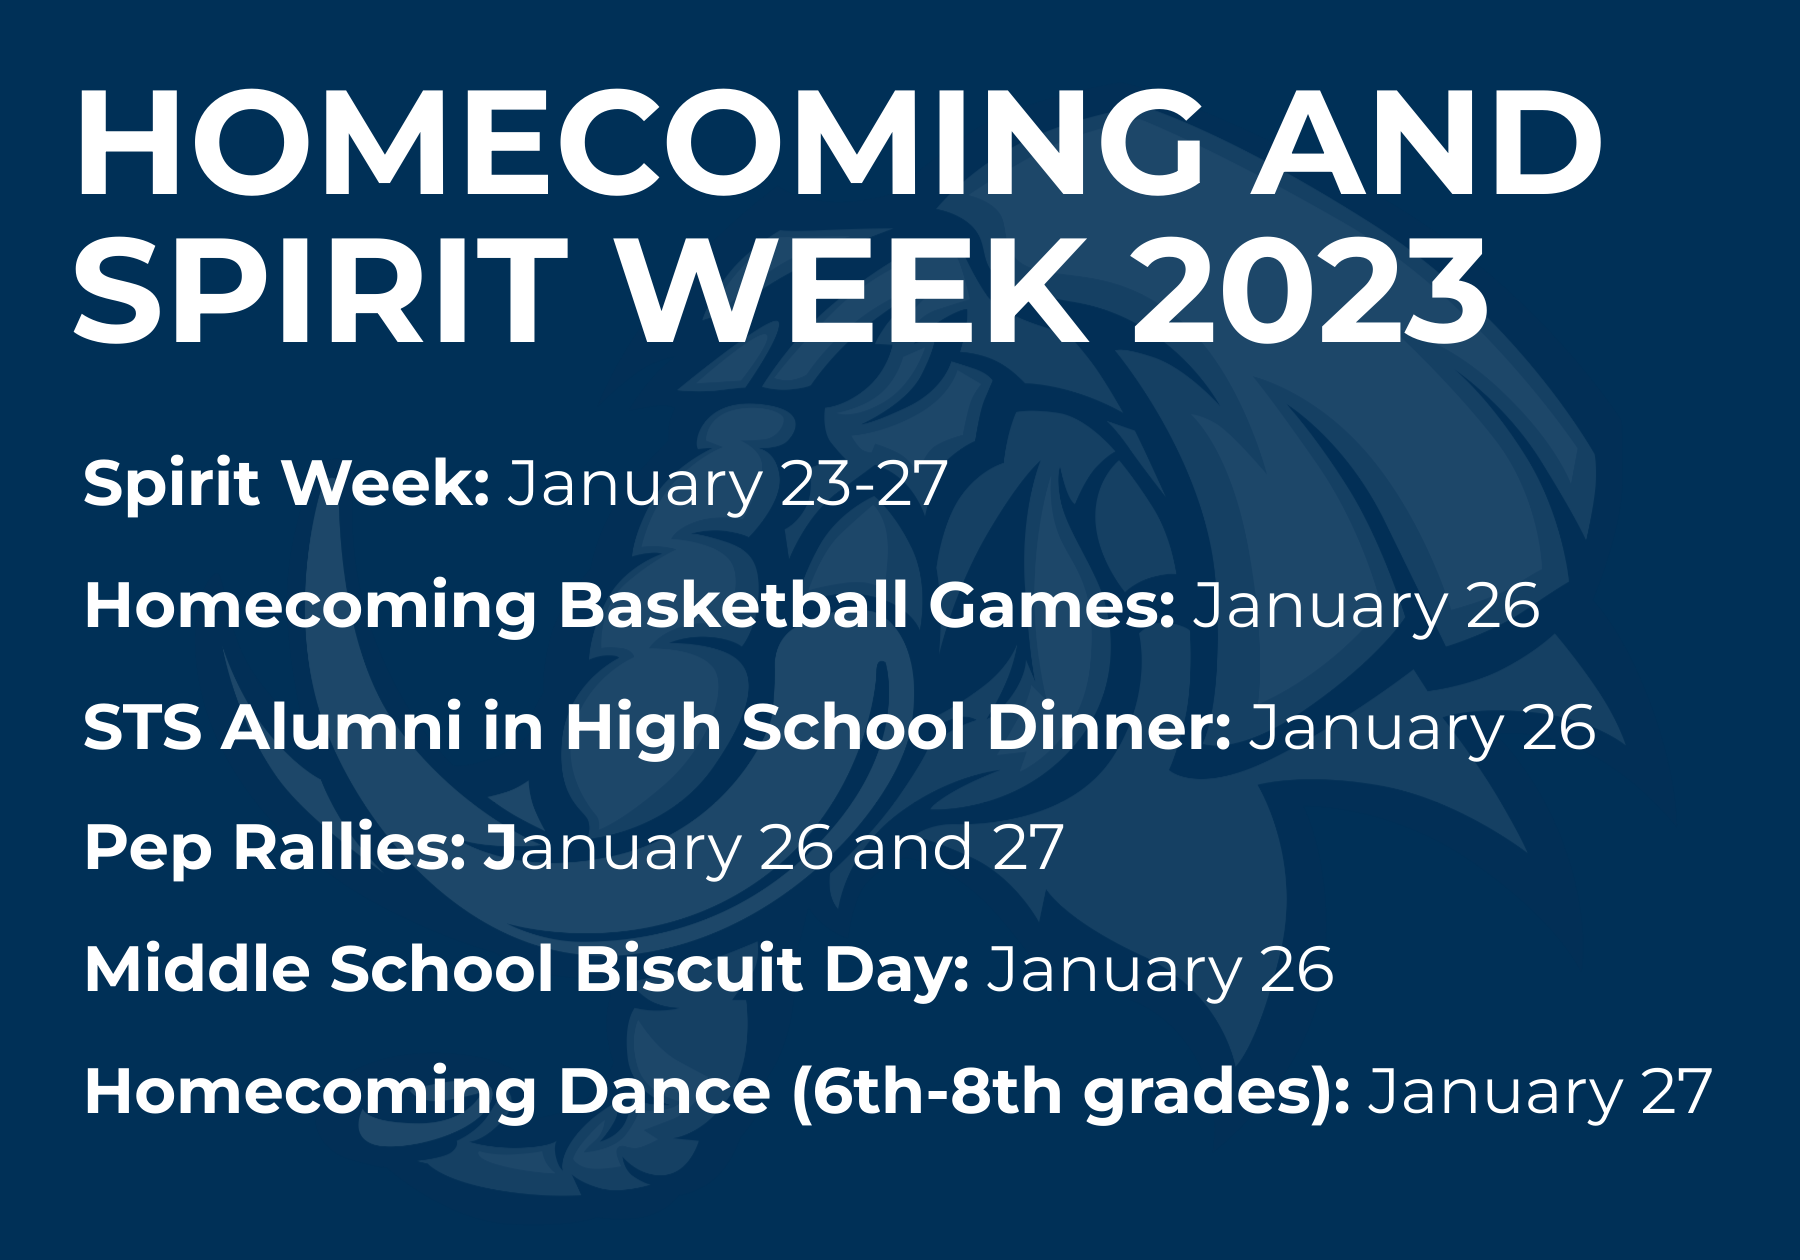 St. Timothy's Homecoming and Spirit Week 2023